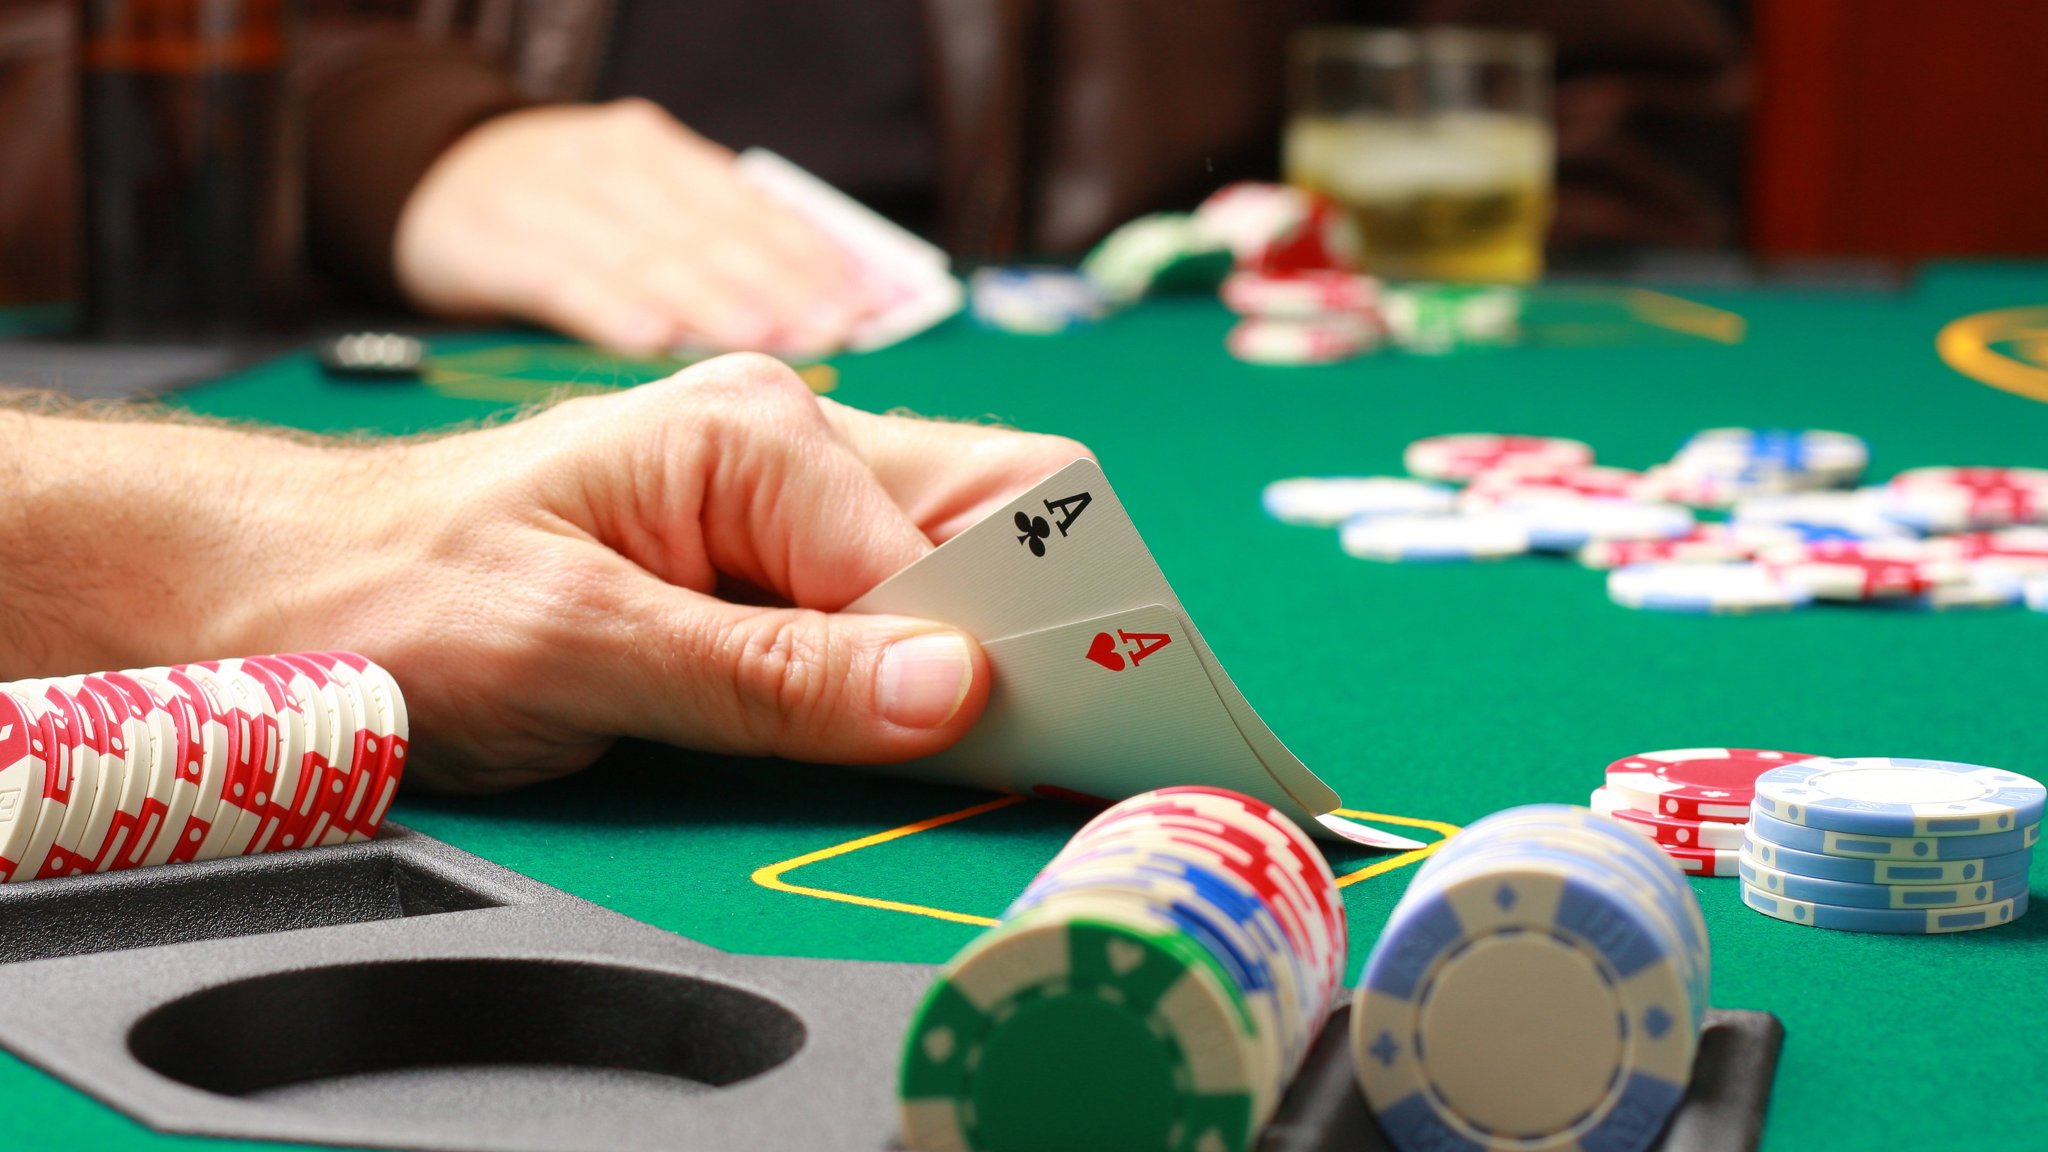 The Differences Between Online & Live Poker